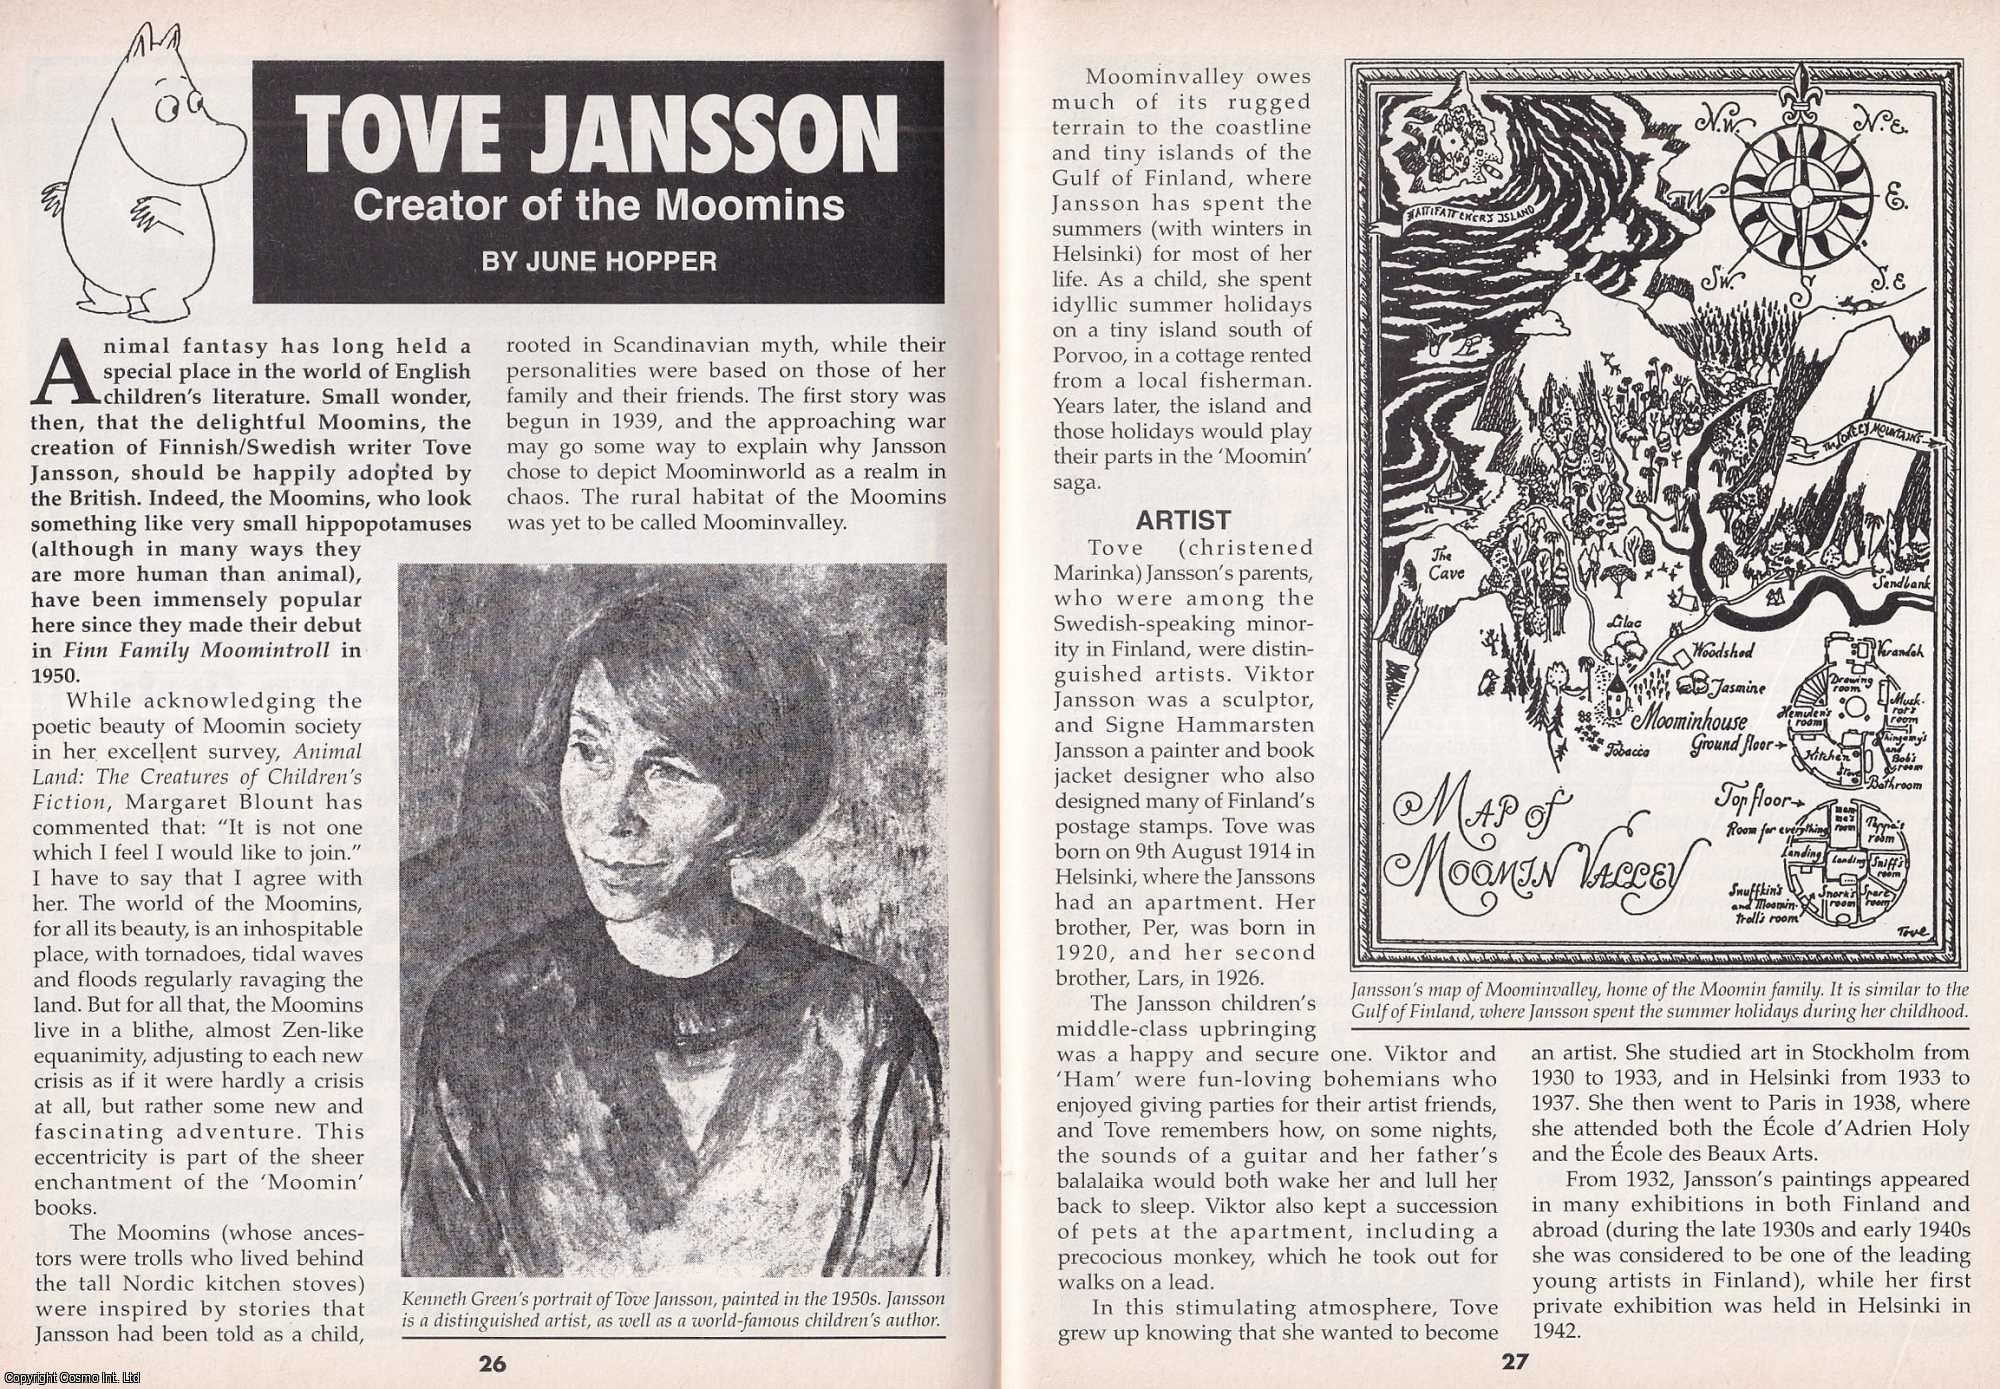 June Hopper - Tove Jansson. Creator of The Moomins. This is an original article separated from an issue of The Book & Magazine Collector publication.